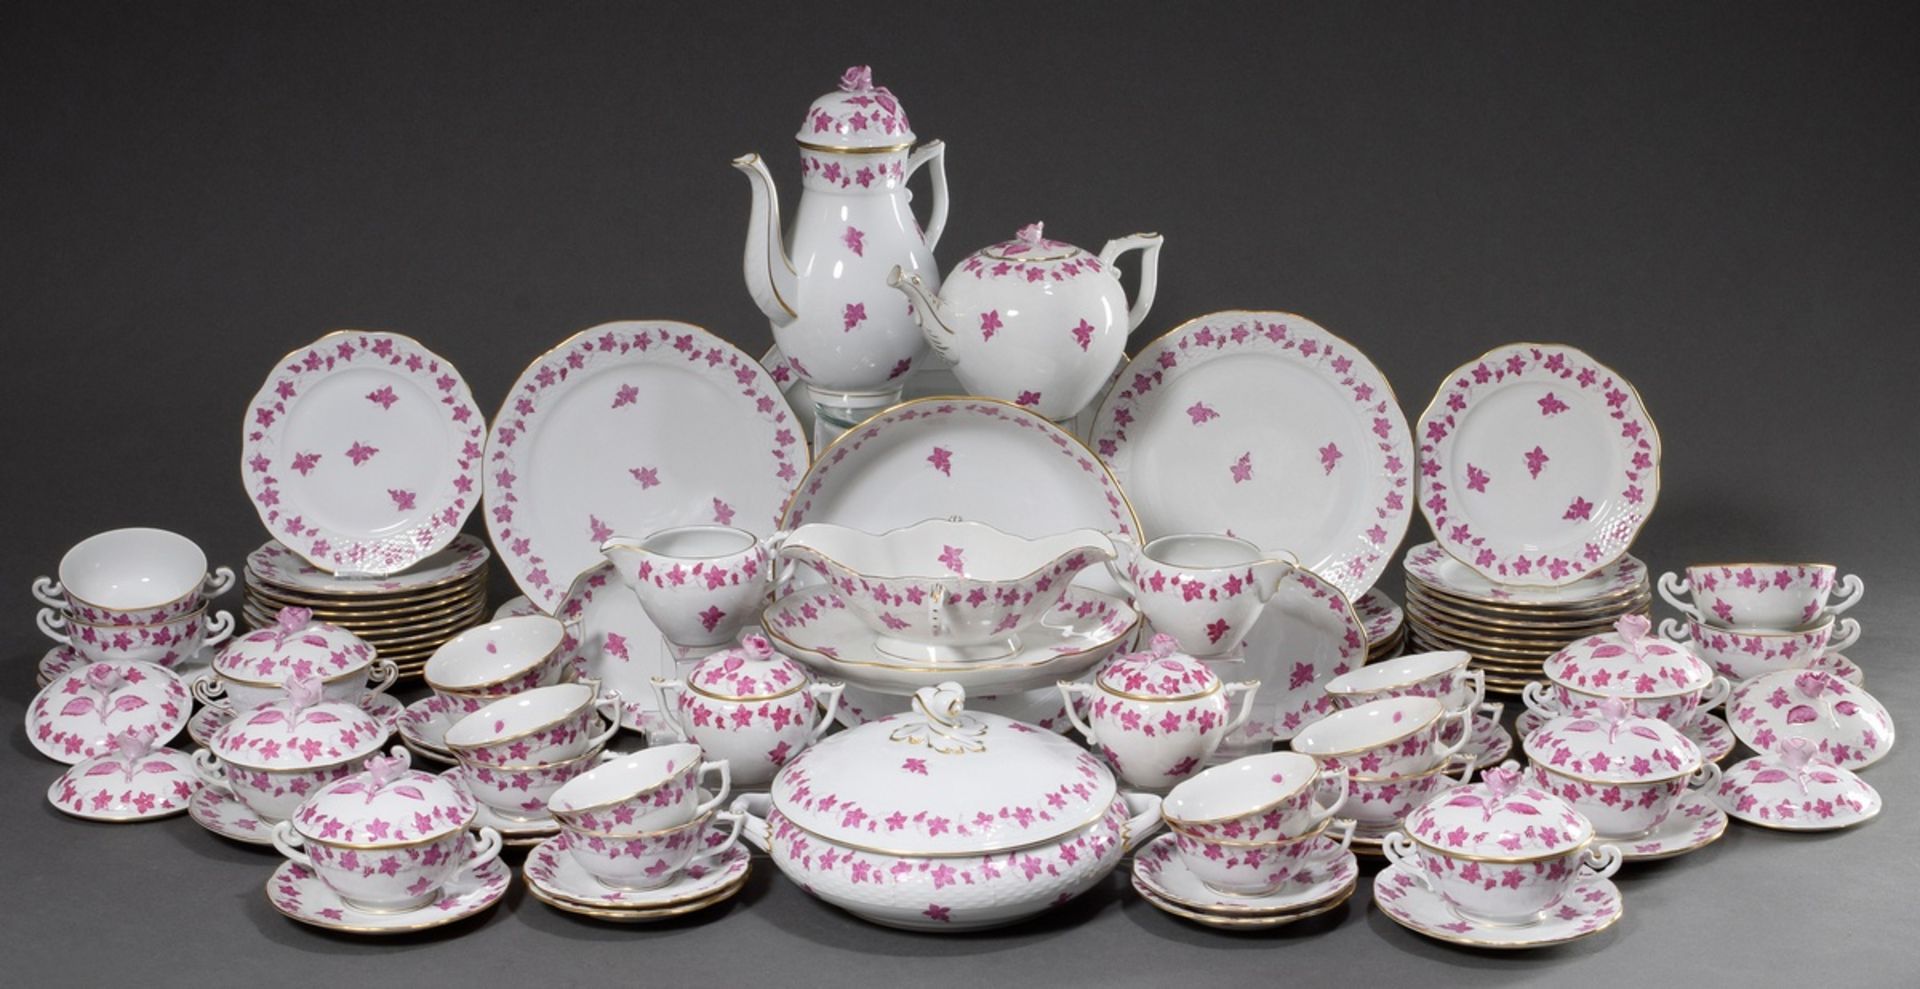 65 pieces Herend coffee and dinner service "Guirland de Raisins" with purple painting and gold rim, - Image 2 of 7